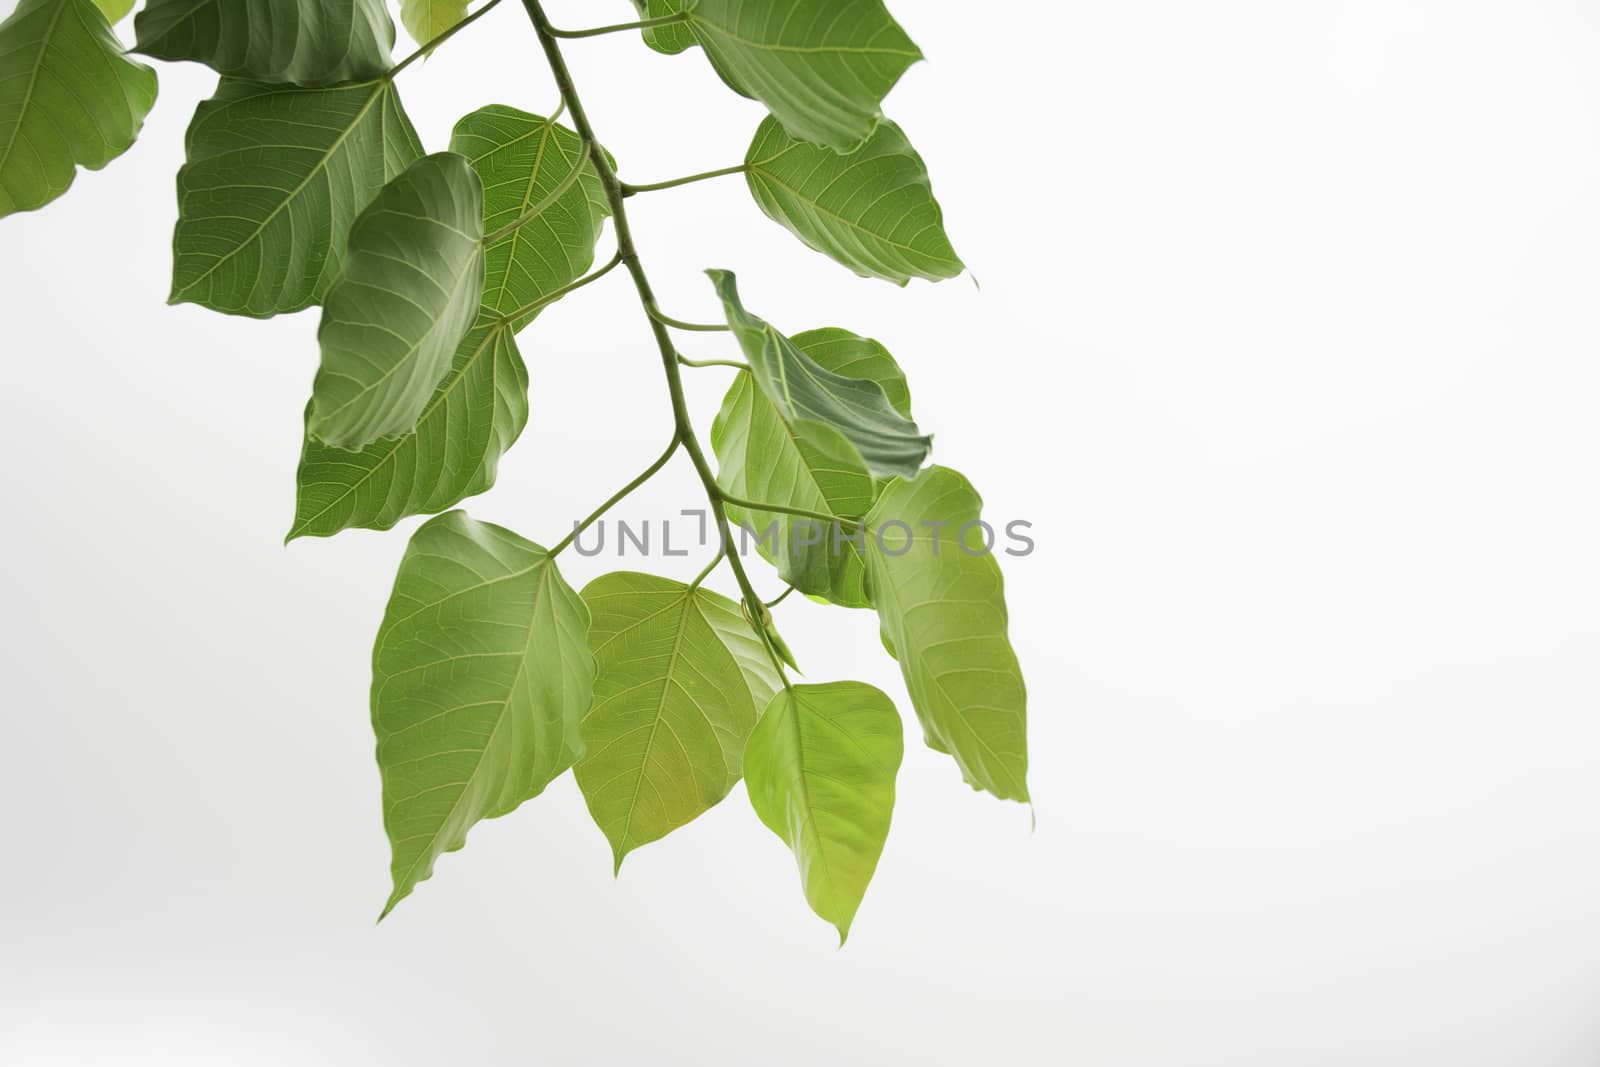 The green leave isolated on white background 